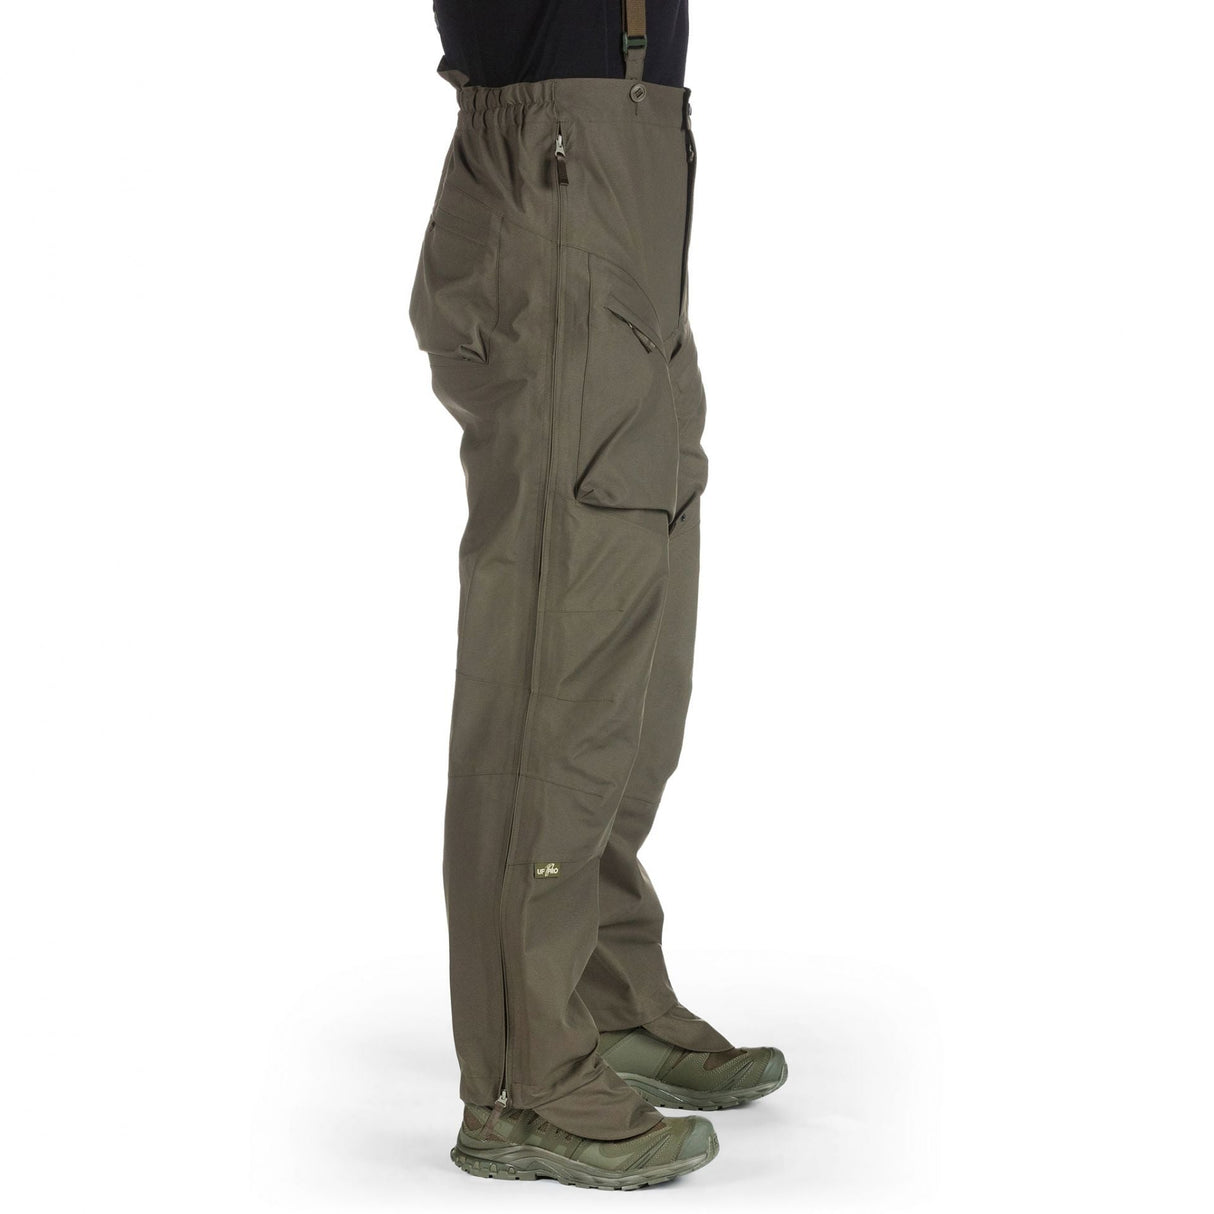 Waterproof Tactical Pants: Black outdoor pants with long YKK® side zippers for ventilation.